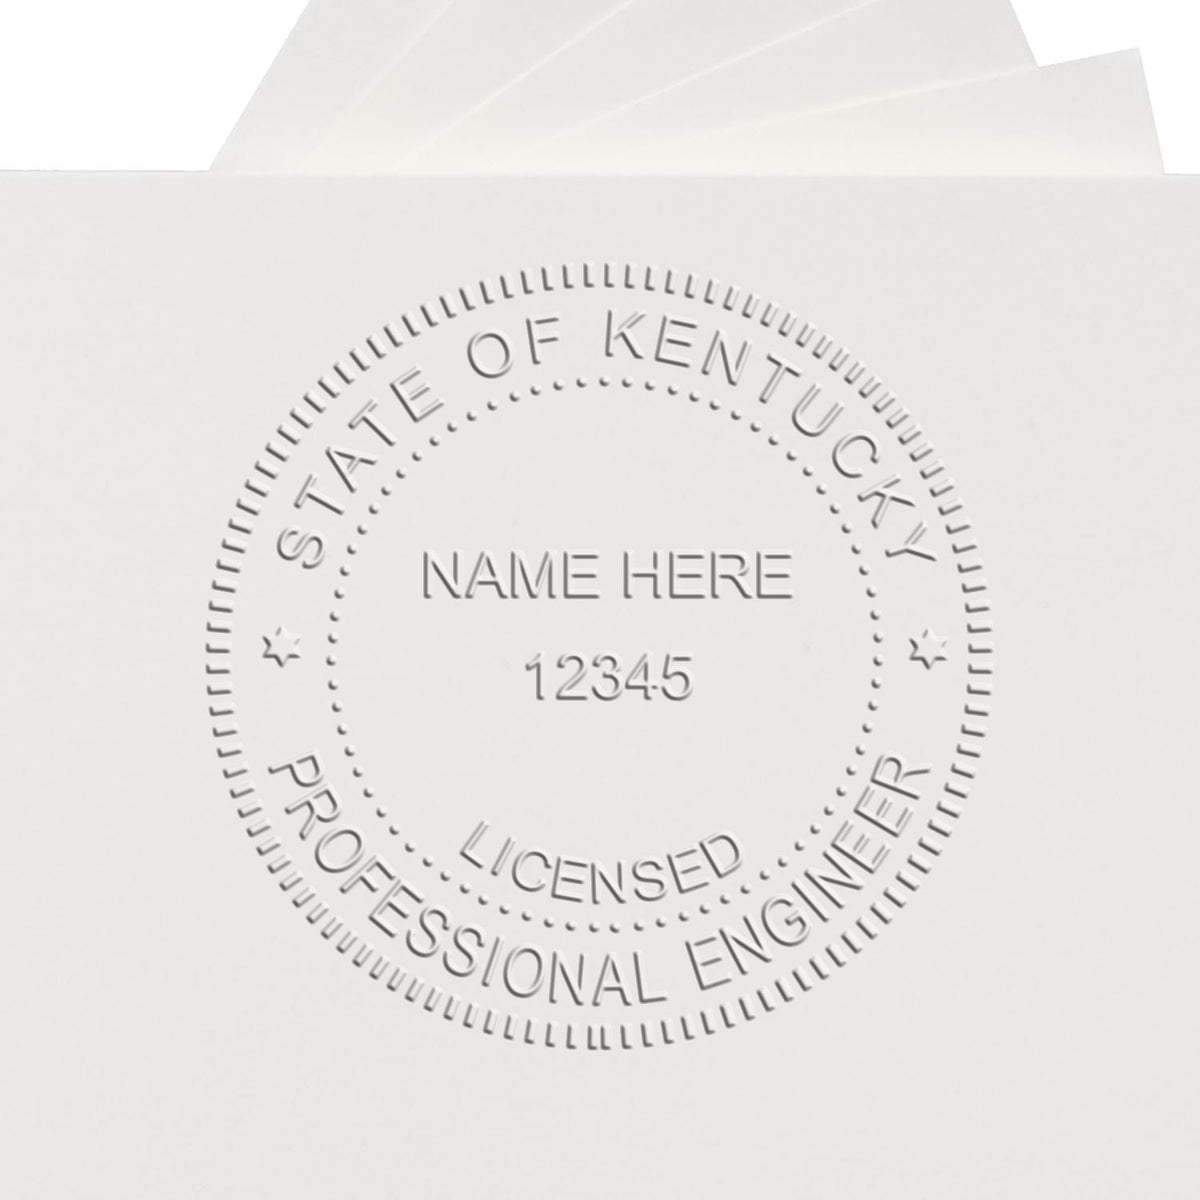 A photograph of the Hybrid Kentucky Engineer Seal stamp impression reveals a vivid, professional image of the on paper.